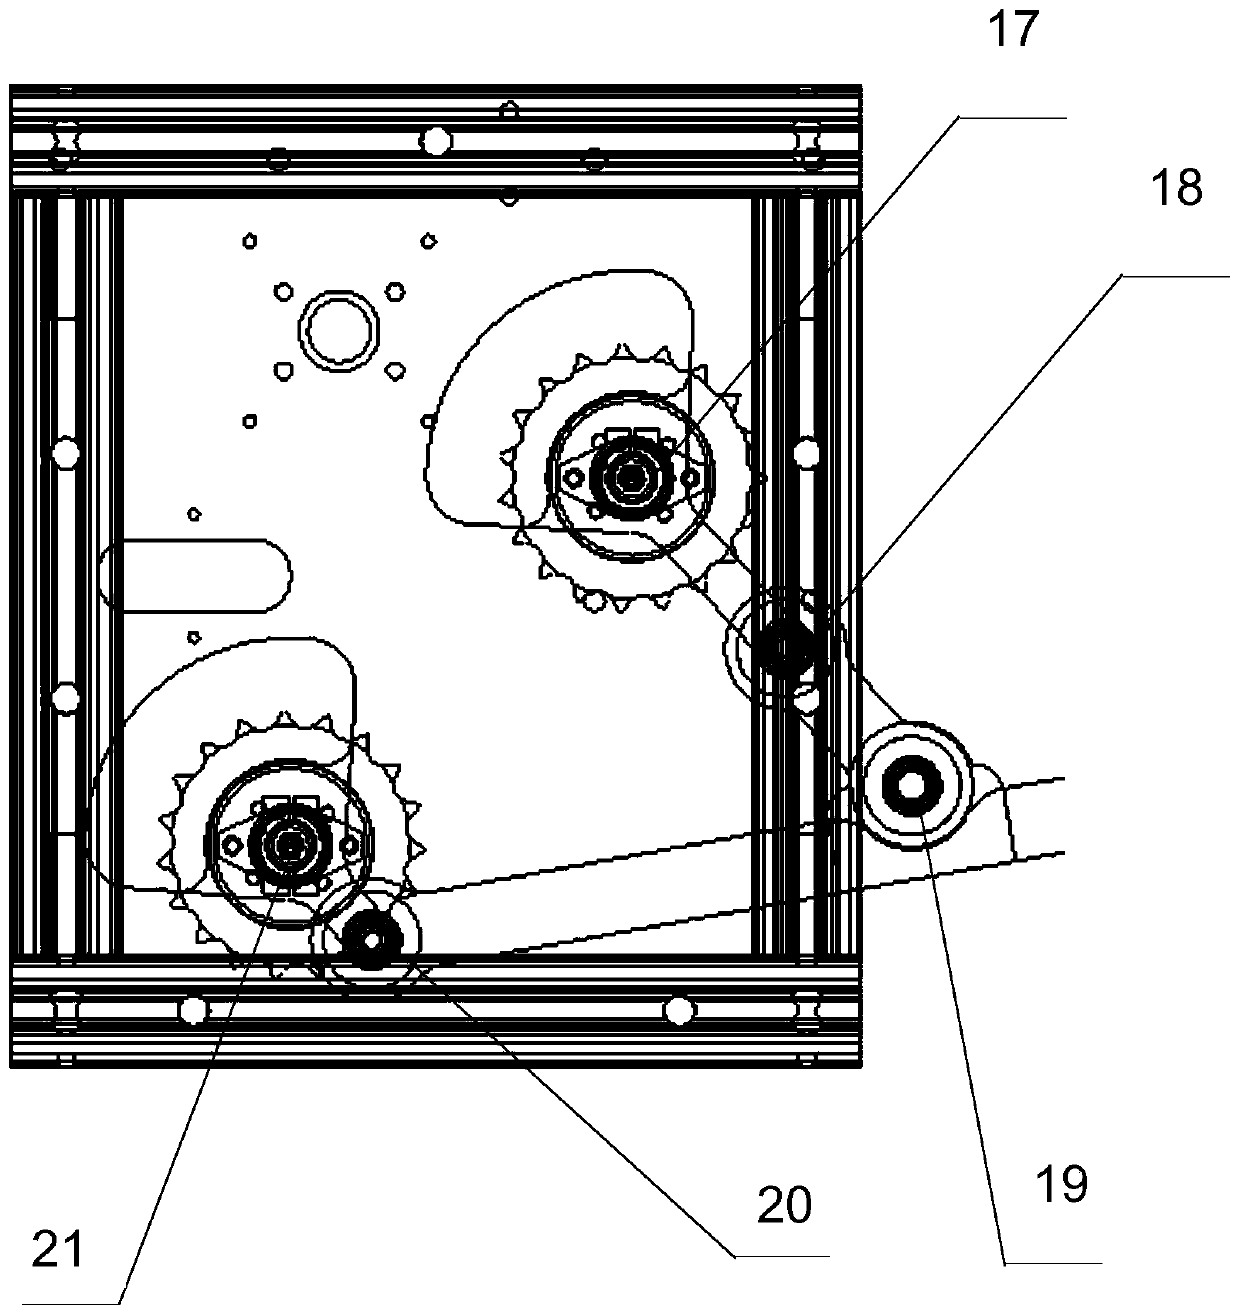 Five-rod type planting mechanism applicable to electric drive transplanter in dry land